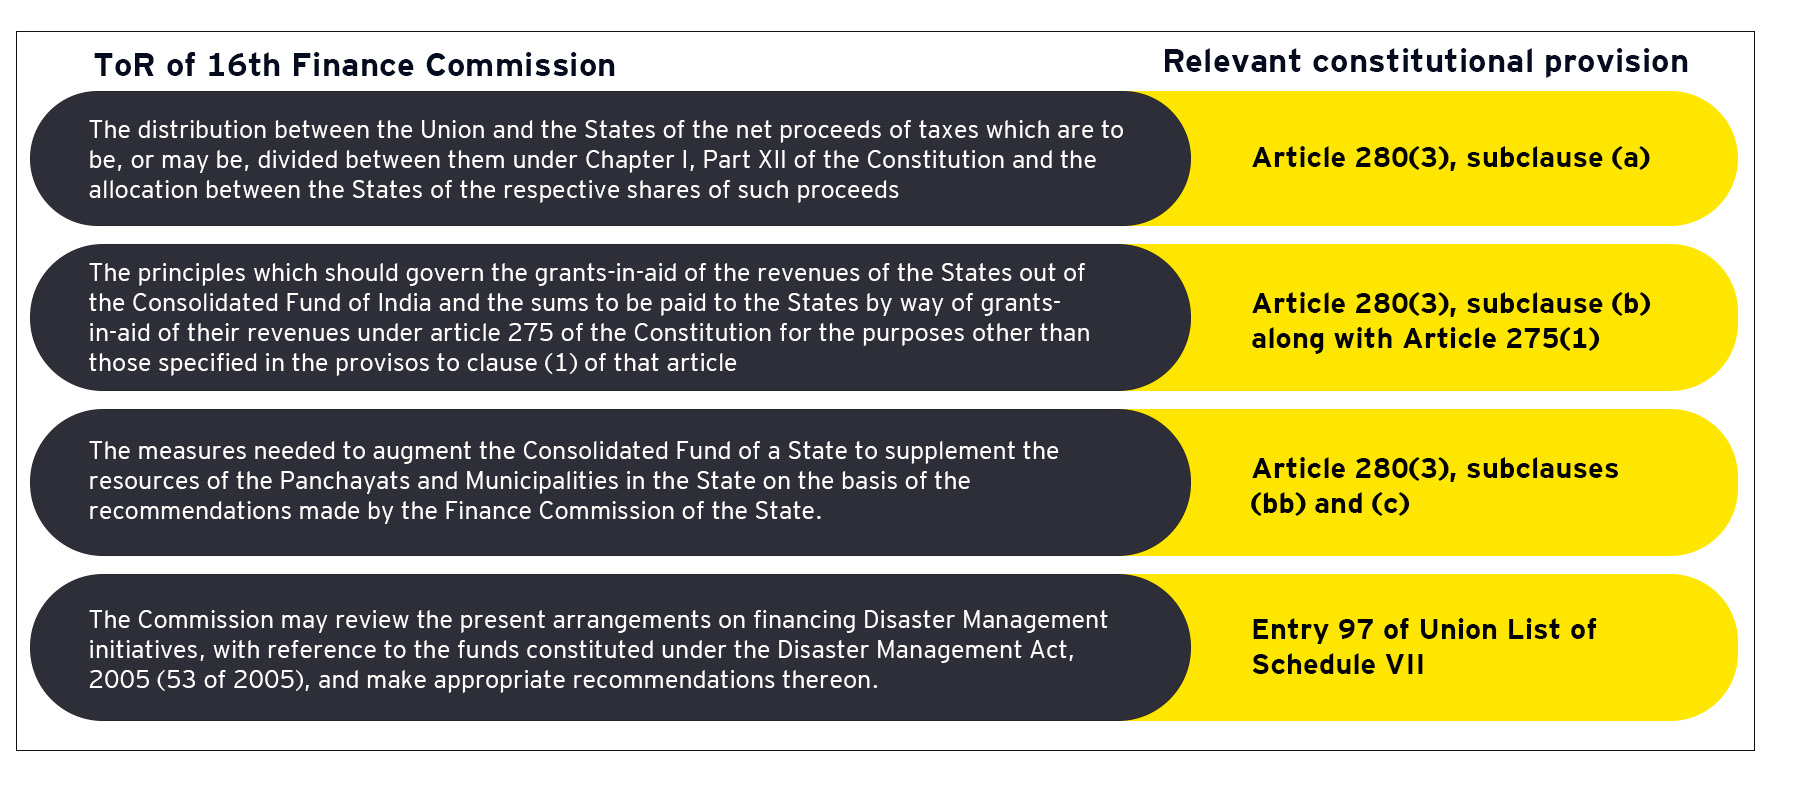 ey-tor-of-16-th-finance-commission